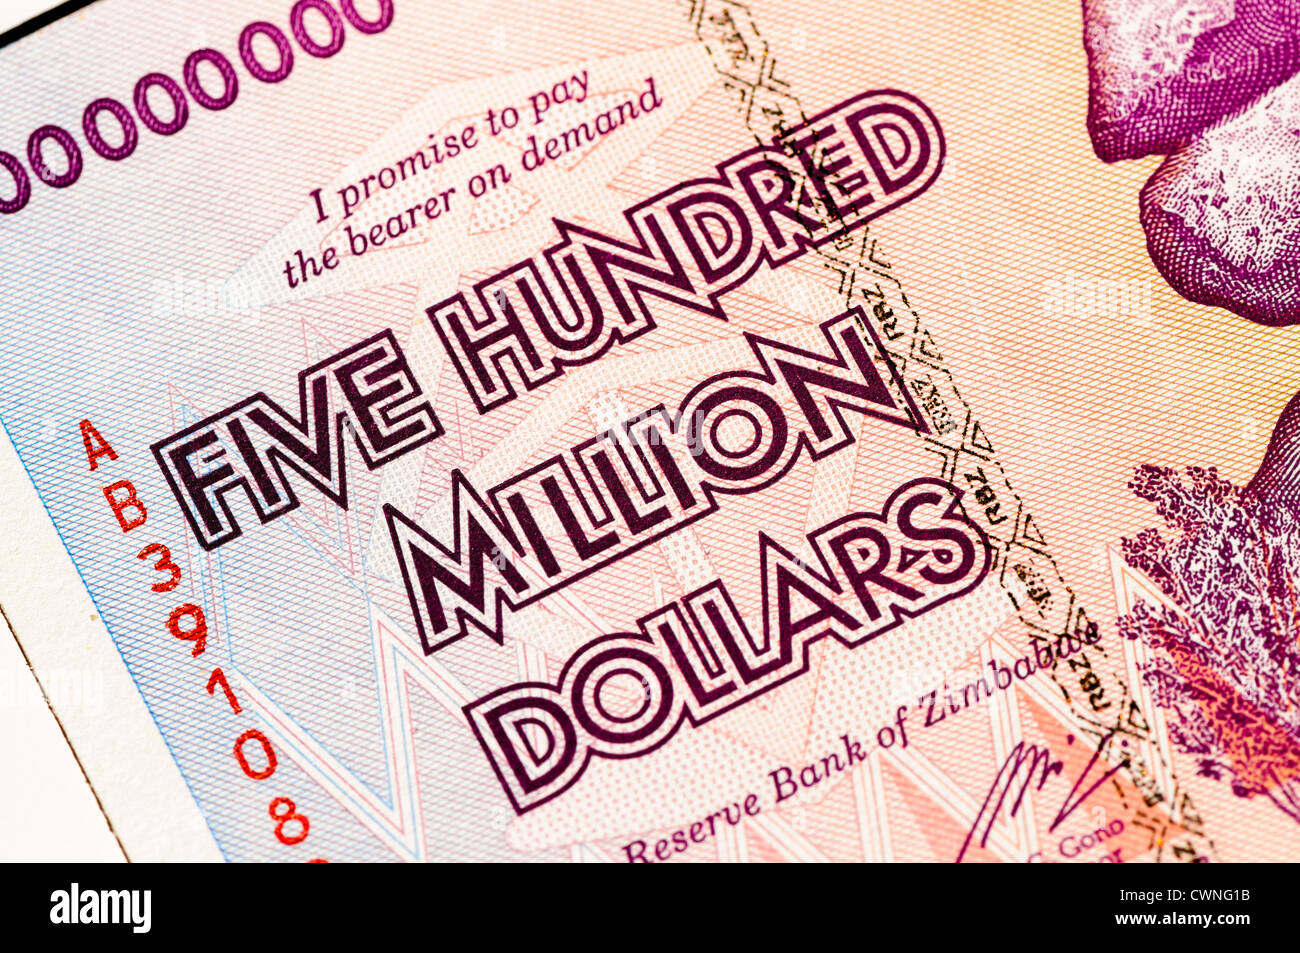 Five hundred million dollar (500,000,000 dollars) bank note from Bank of Zimbabwe, 2009, as a result of hyperinflation Stock Photo